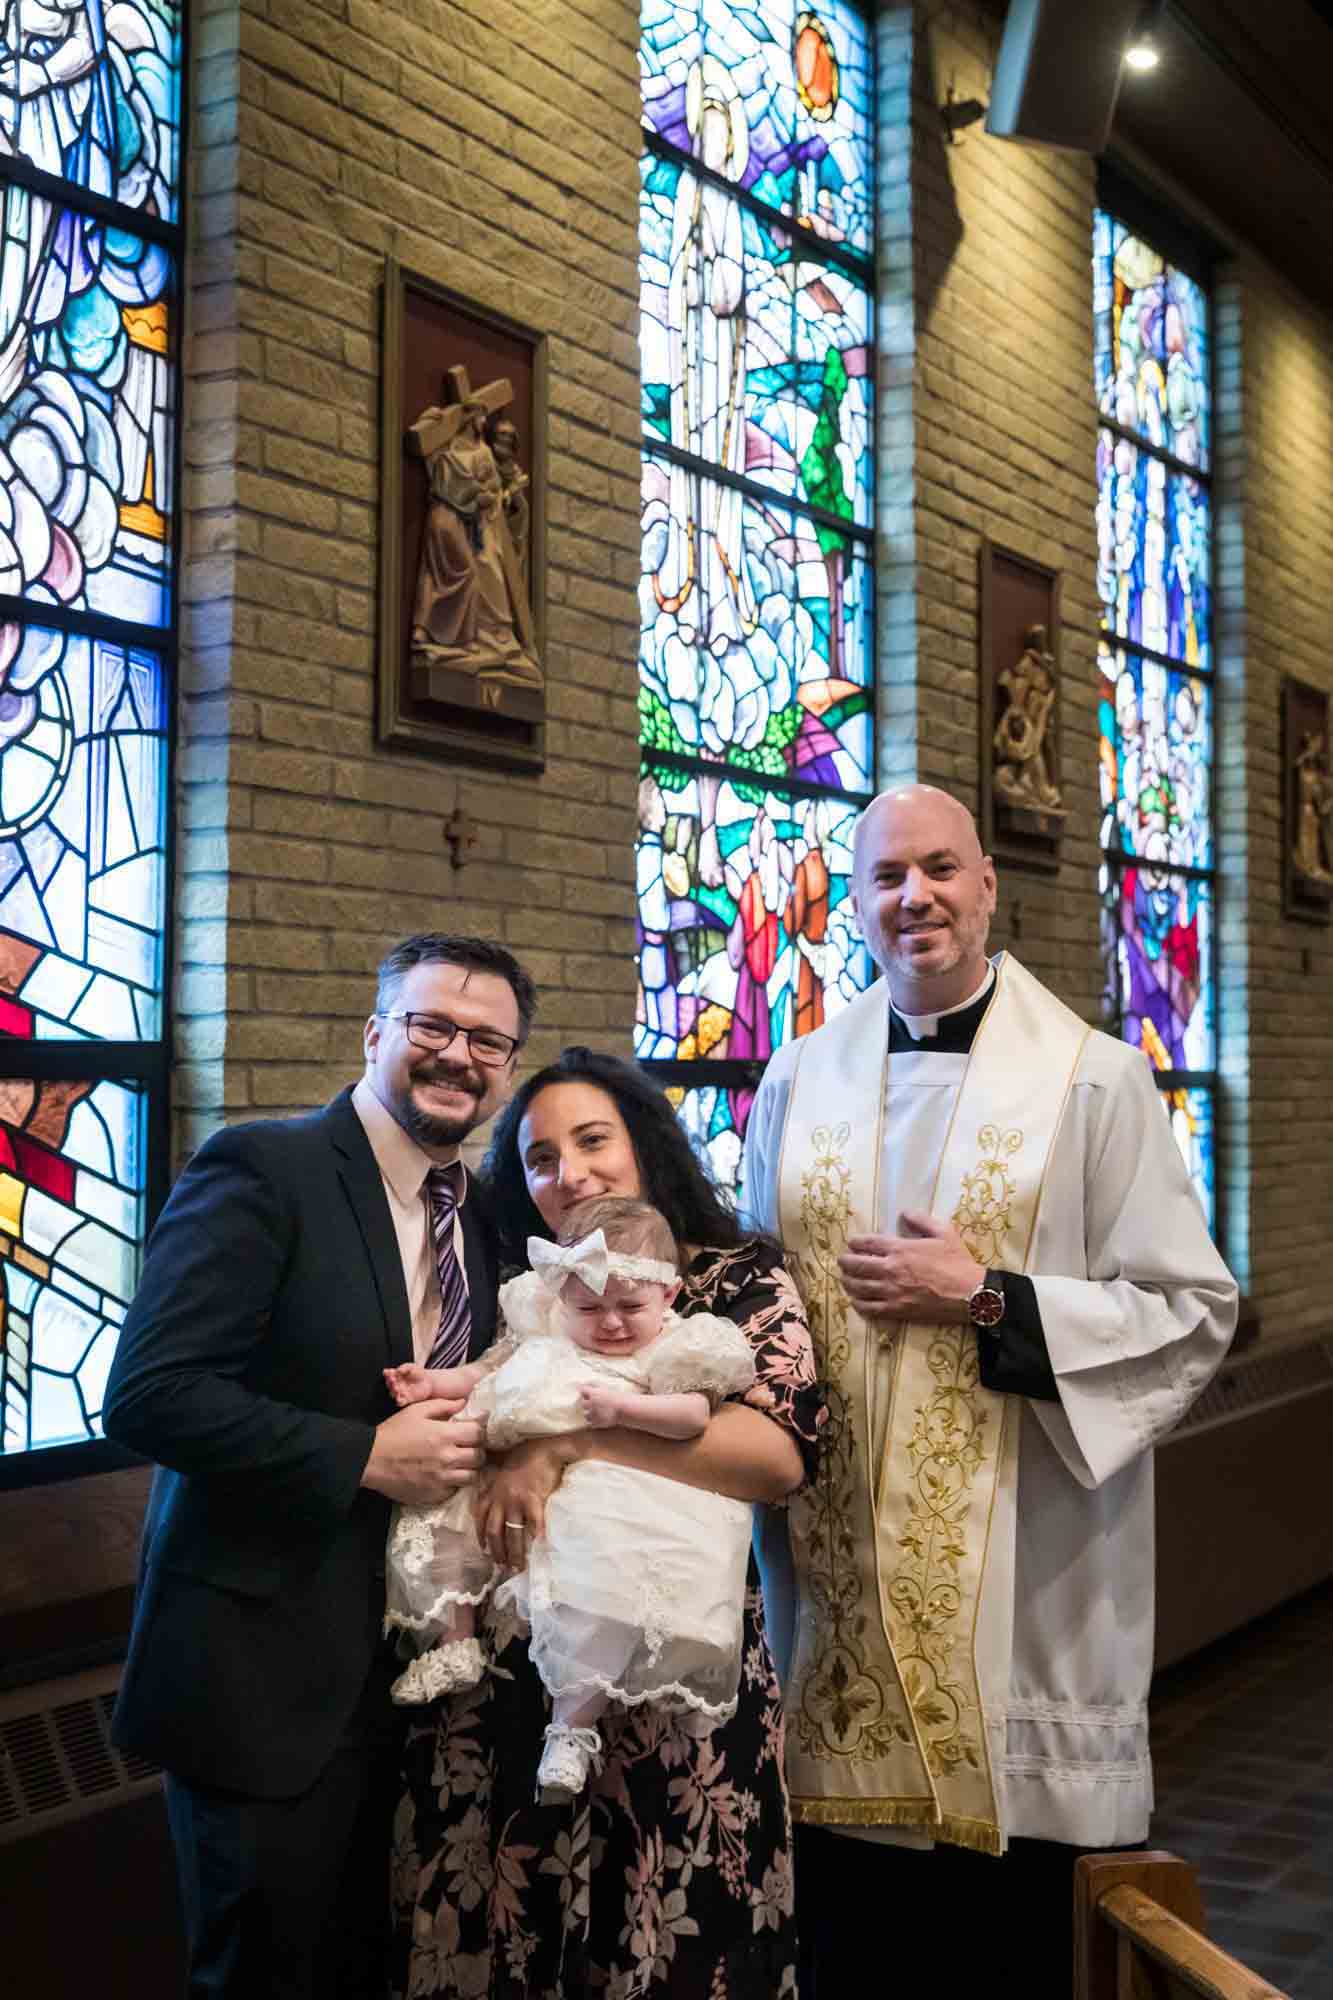 Maspeth baptism photos of family holding baby with priest in front of stained glass windows